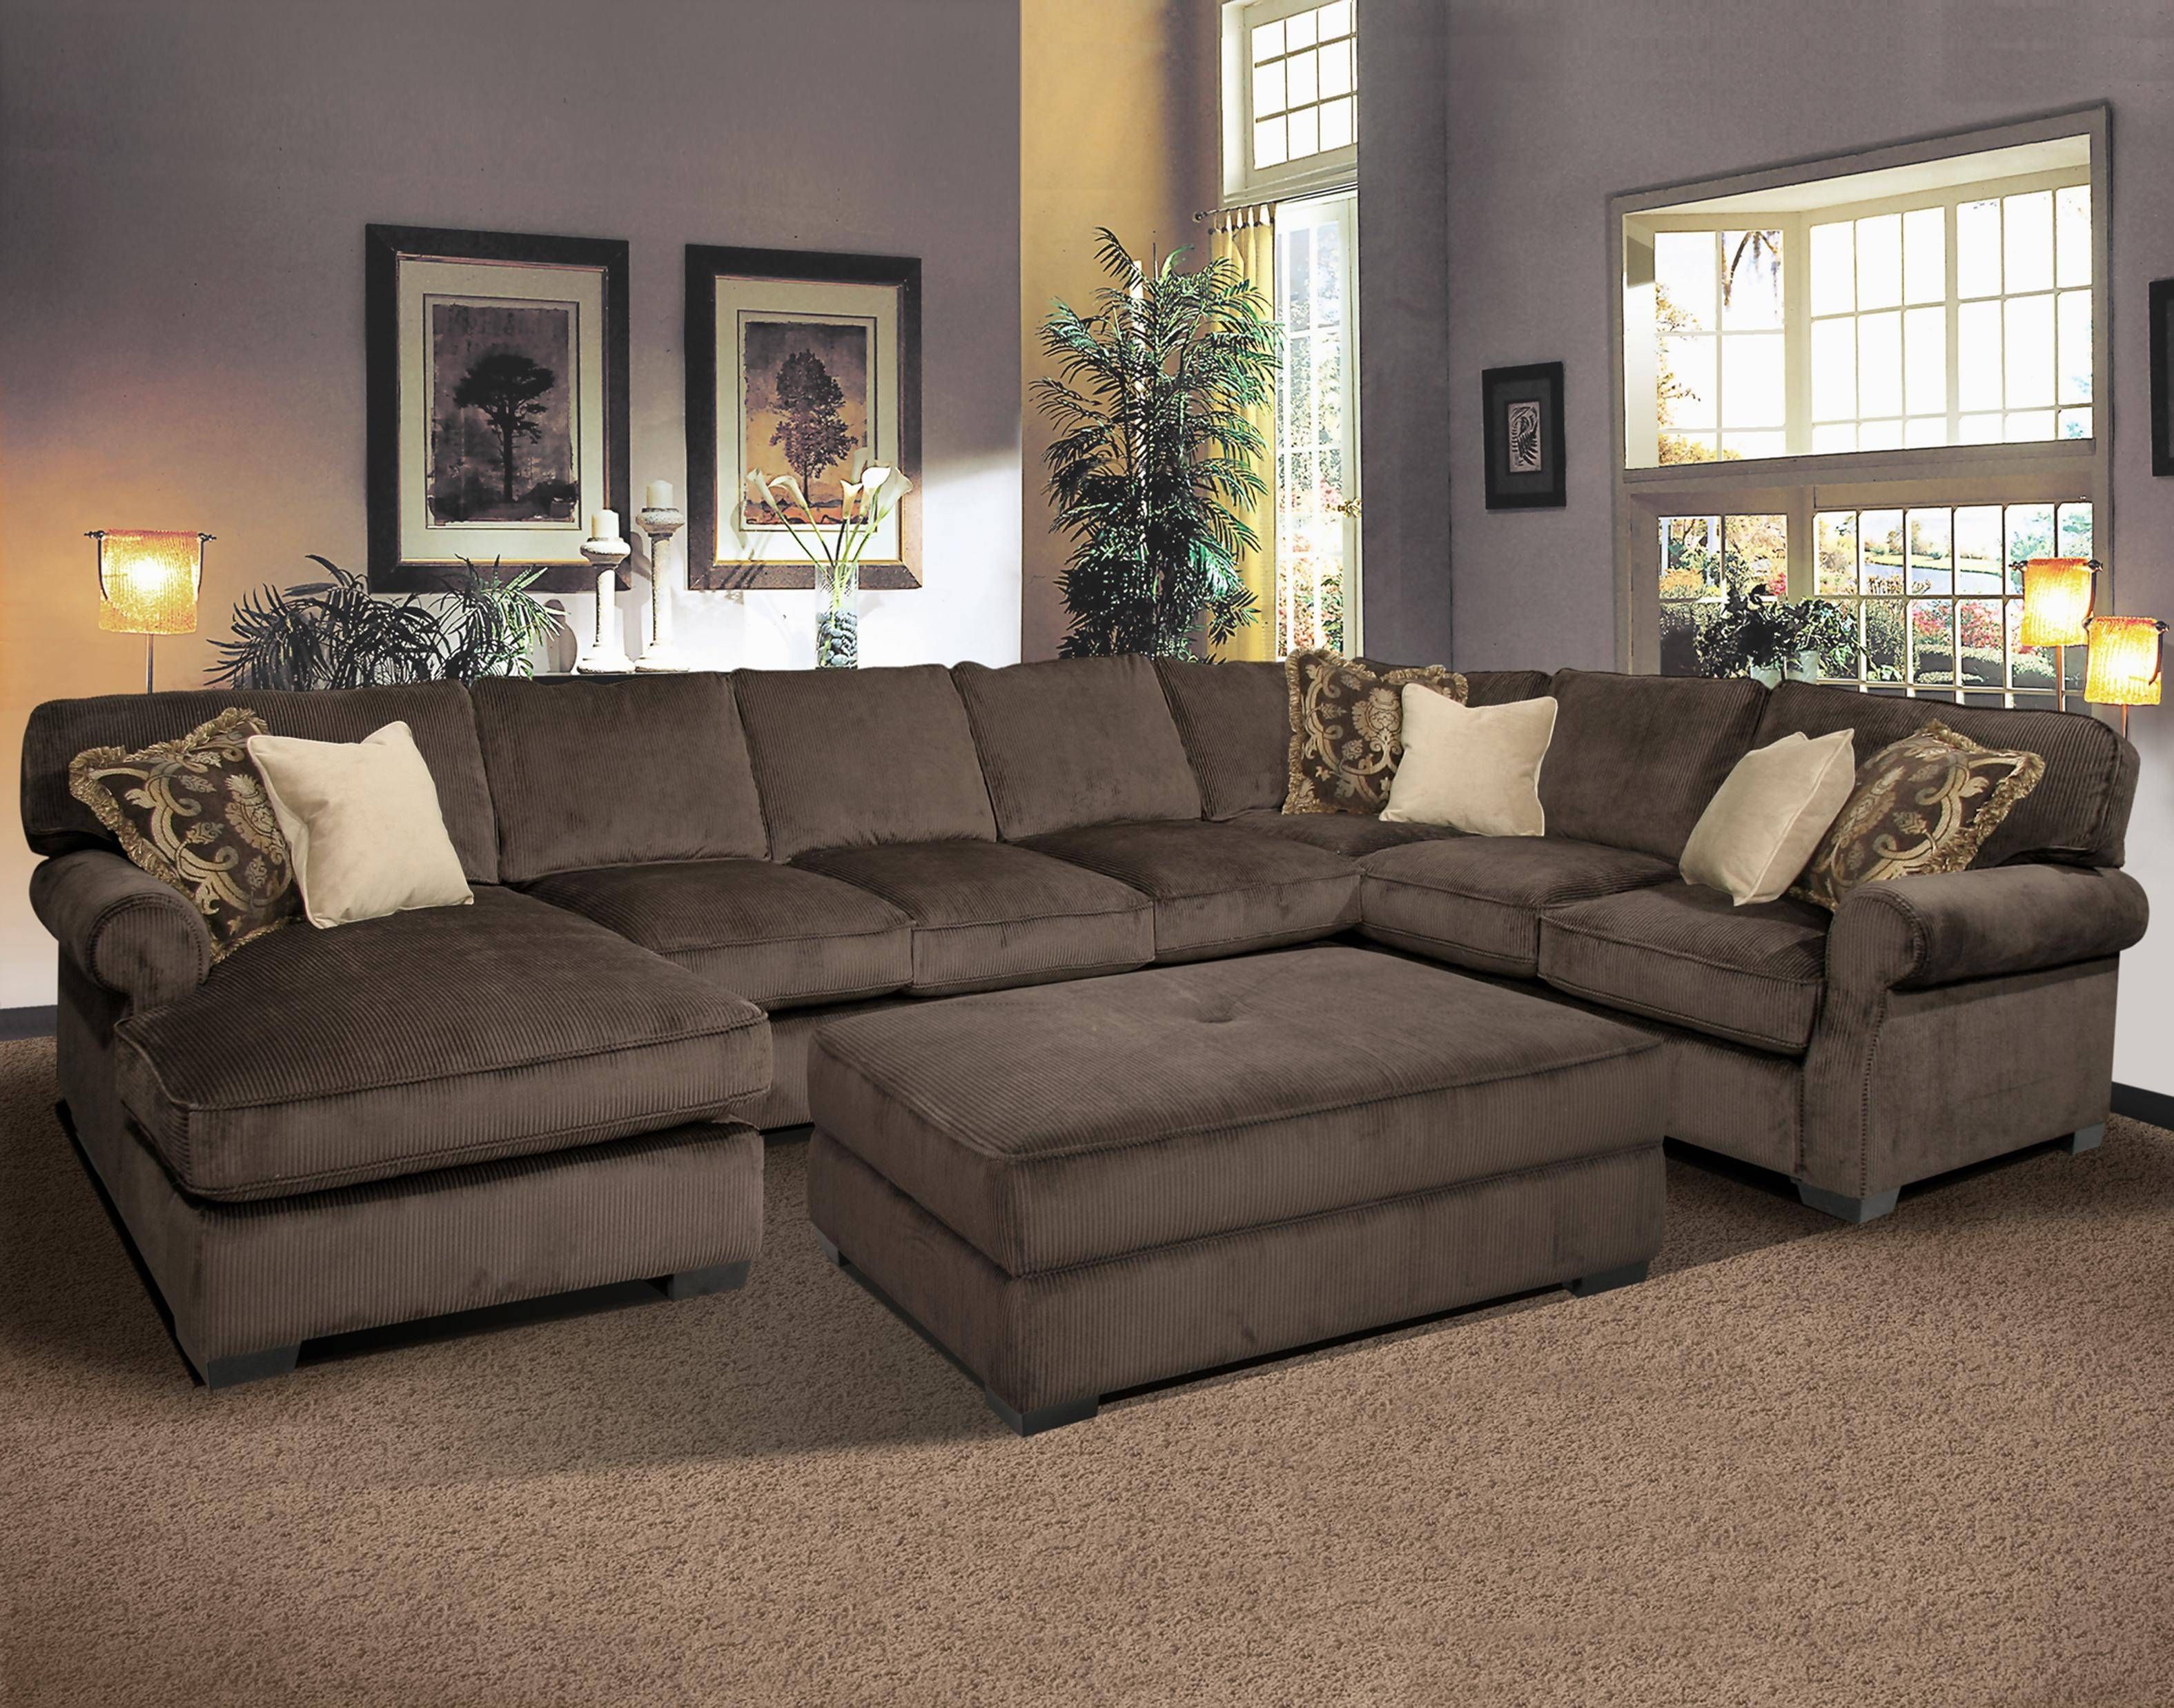 Overstuffed Sectional Sofa – Cleanupflorida Within Backless Sectional Sofa (View 17 of 30)